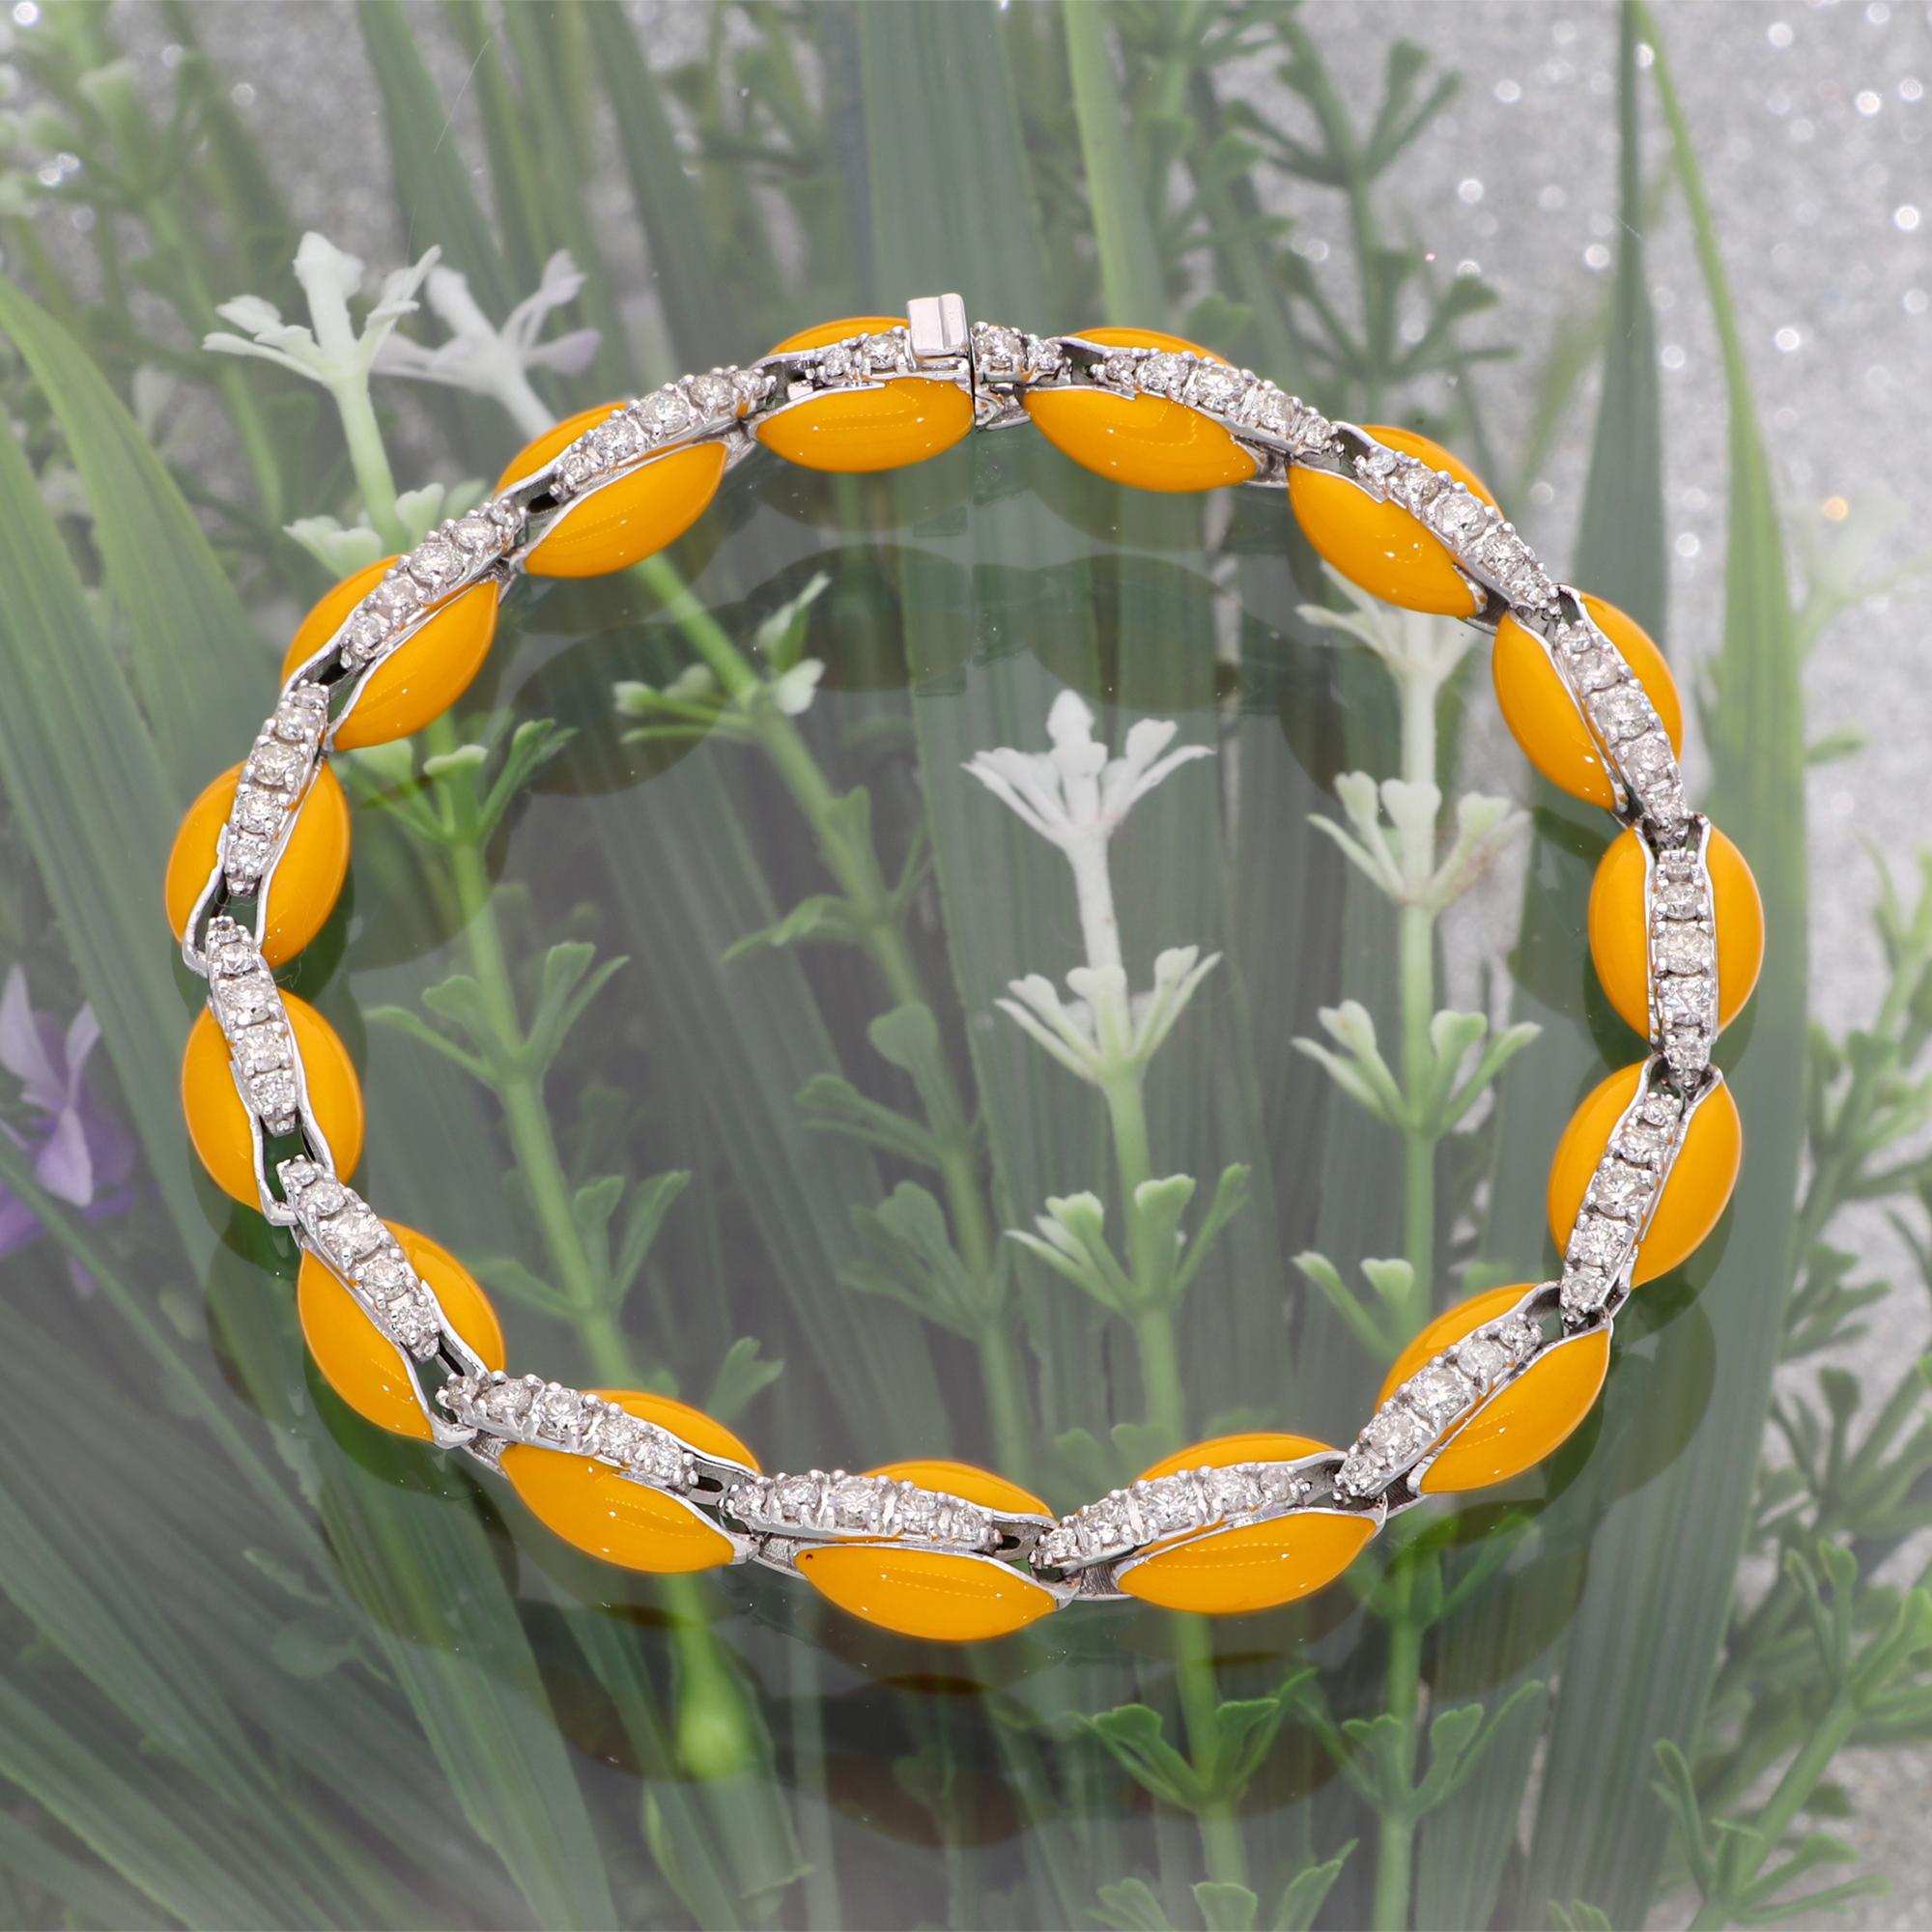 Item Code :- STBR-4044M
Gross Wt. :- 17.26 gm
10k Solid White Gold Wt. :- 16.88 gm
Natural Diamond Wt. :- 1.90 Ct. ( AVERAGE DIAMOND CLARITY SI1-SI2 & COLOR H-I )
Bracelet Size :- 7 Inches

✦ Sizing
.....................
We can adjust most items to